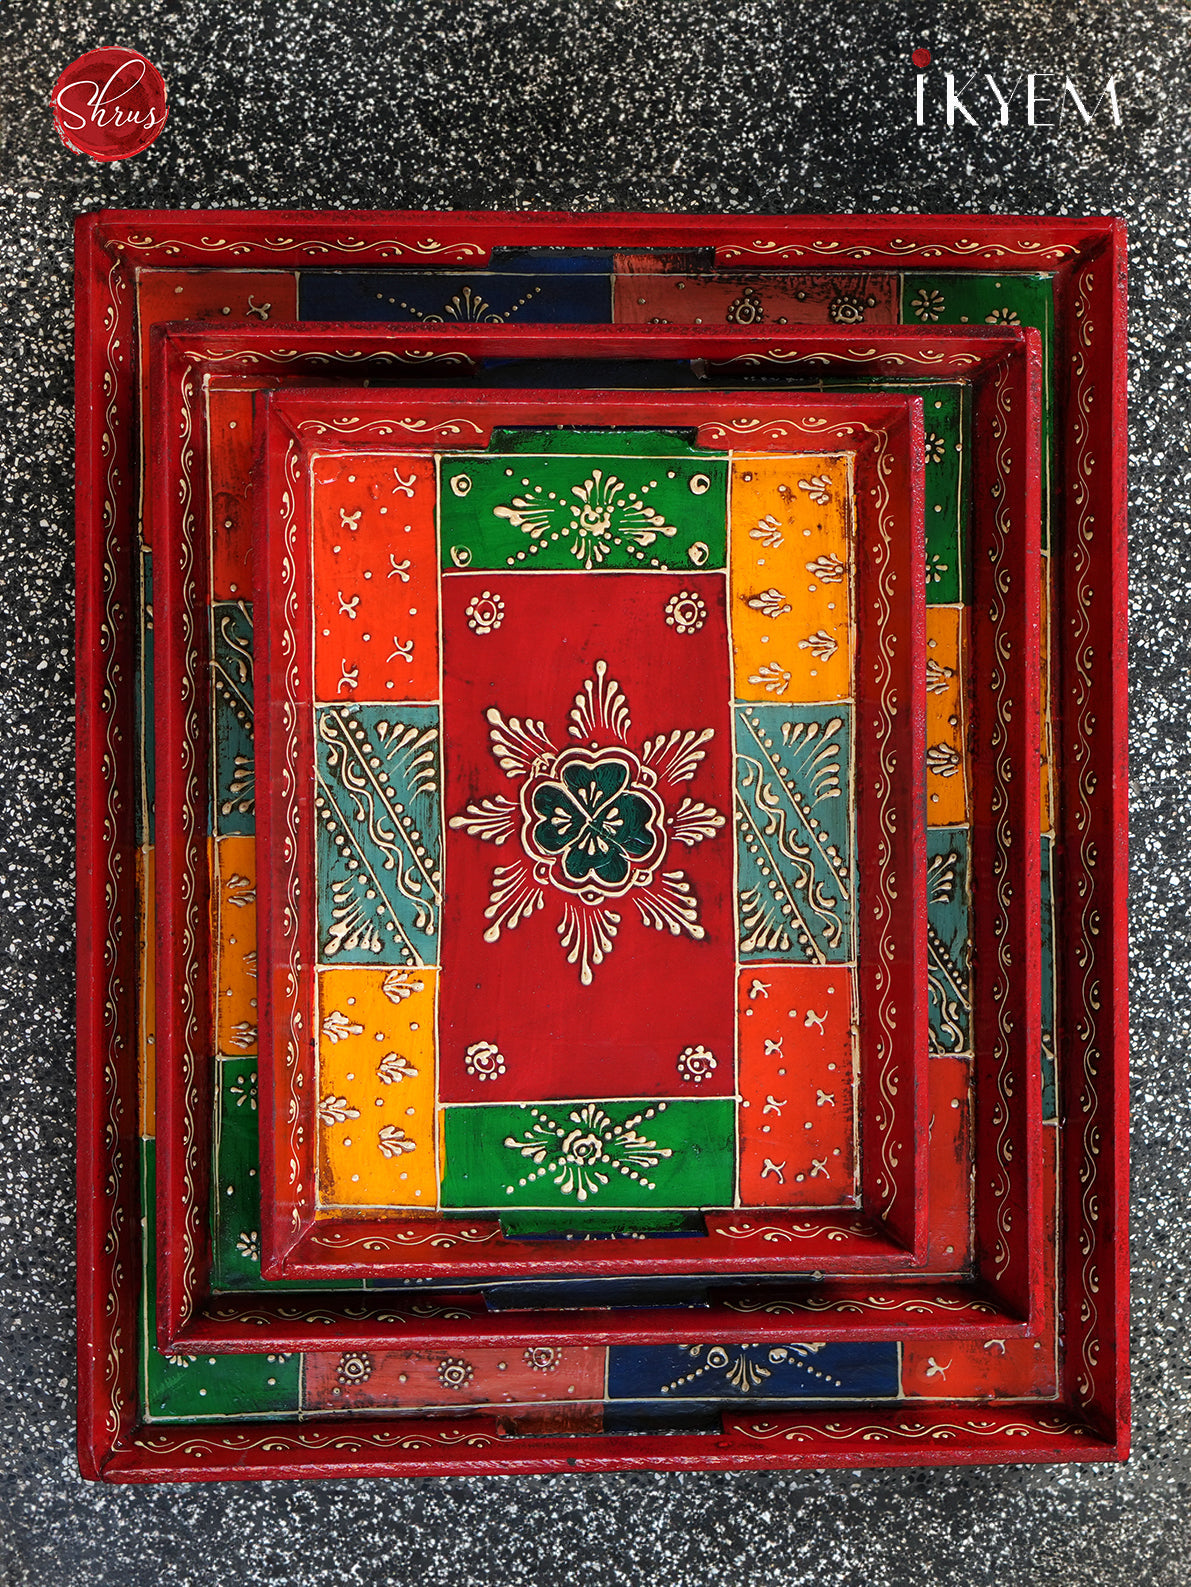 Handpainted wooden trays